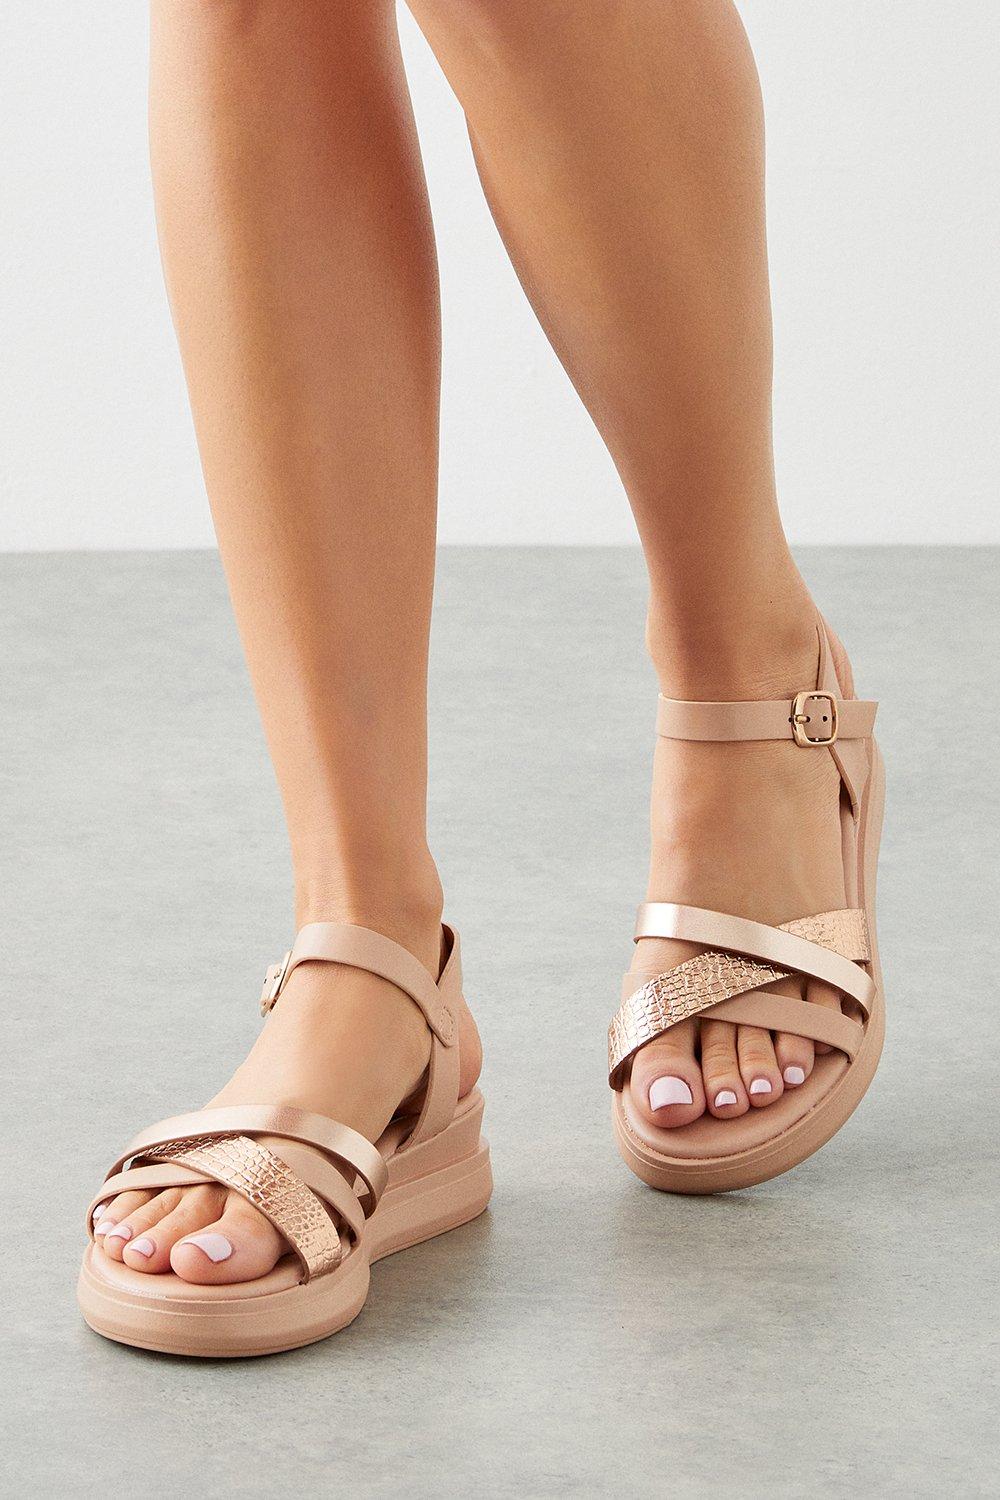 Women’s Good For The Sole: Wide Fit Harper Low Wedges - blush - 6